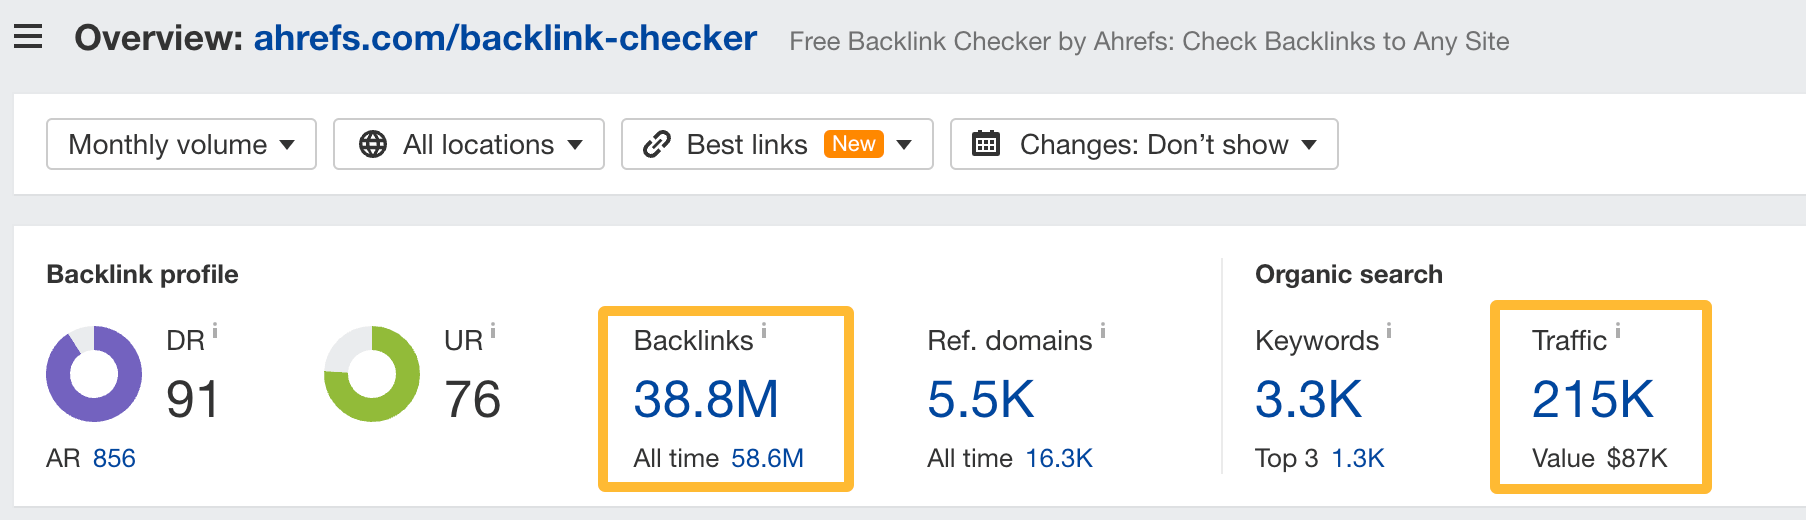 backlink-and-traffic-data-via-ahrefs- 12 Field-Tested Content Marketing Tactics